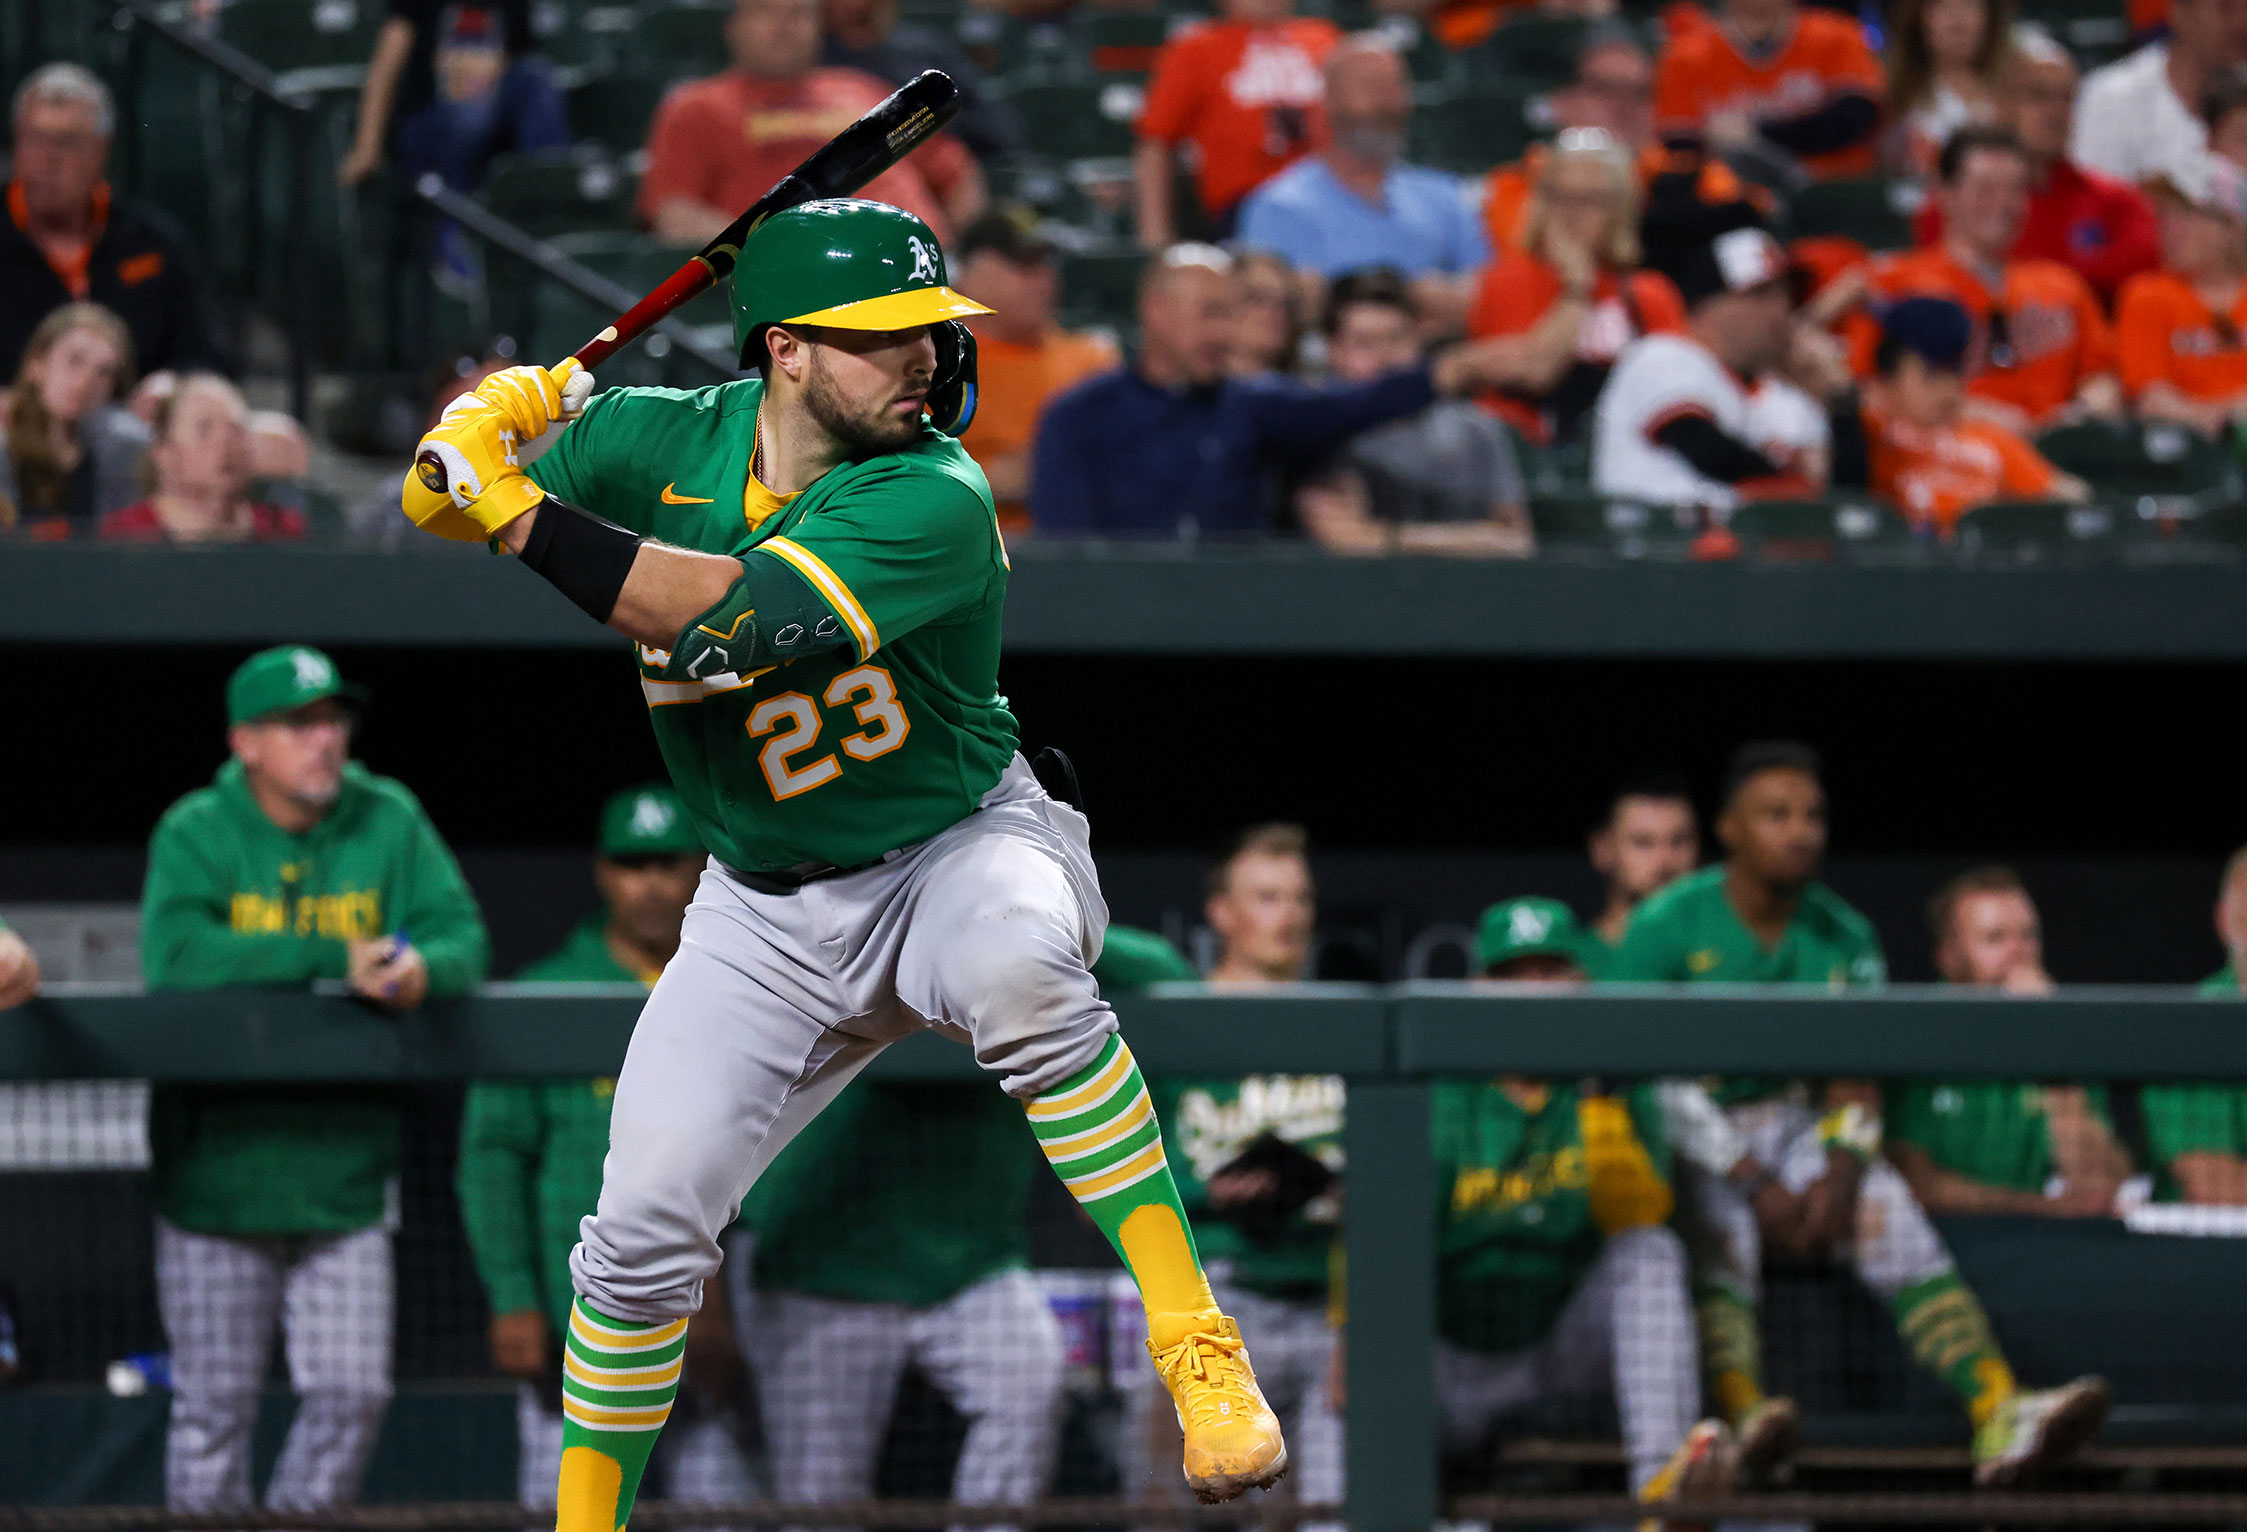 How the Oakland A's can not only work, but thrive in Las Vegas